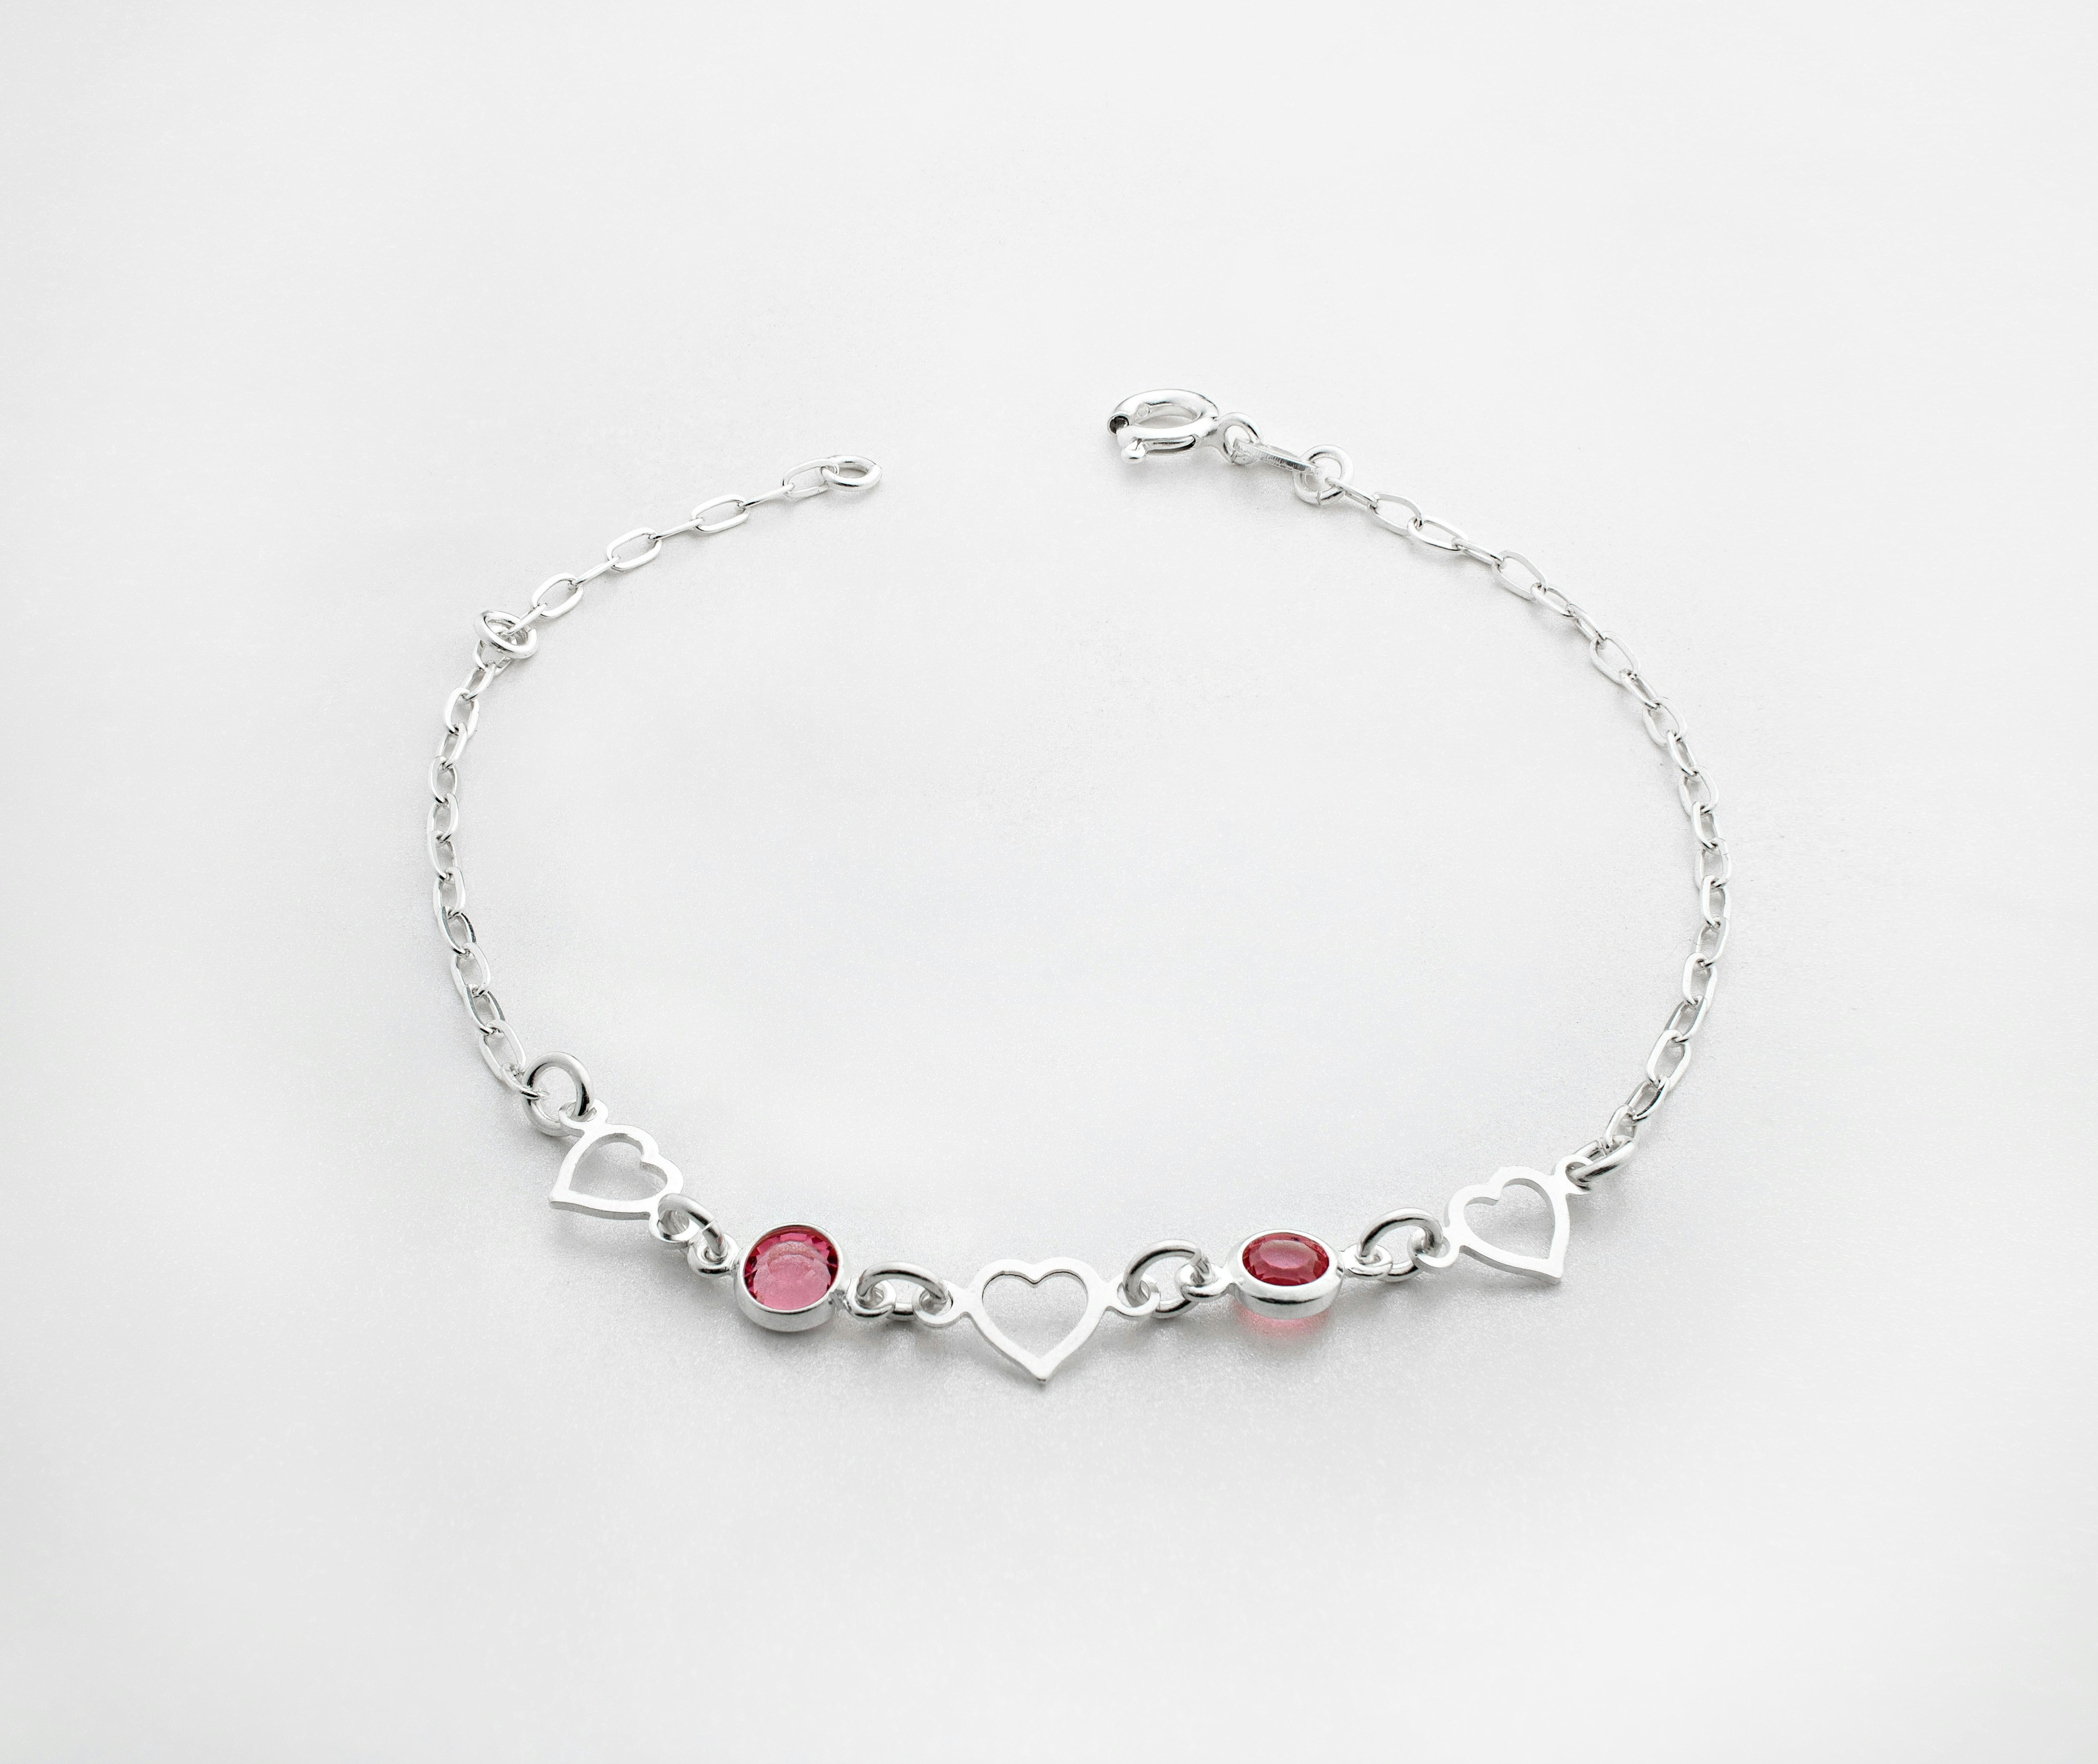 A silver bracelet in plain bright background with tiny red gems and silver heart-shaped pieces